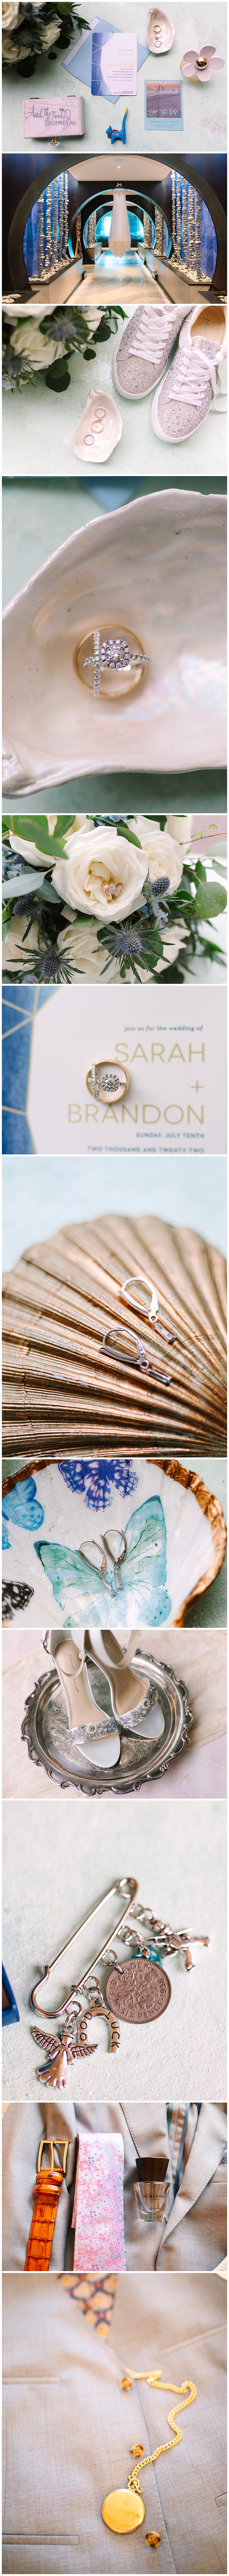 Ocean themed wedding details for an intimate wedding at Ocean One Resort in Atlantic Beach, Florida captured by Laura Perez Photography.